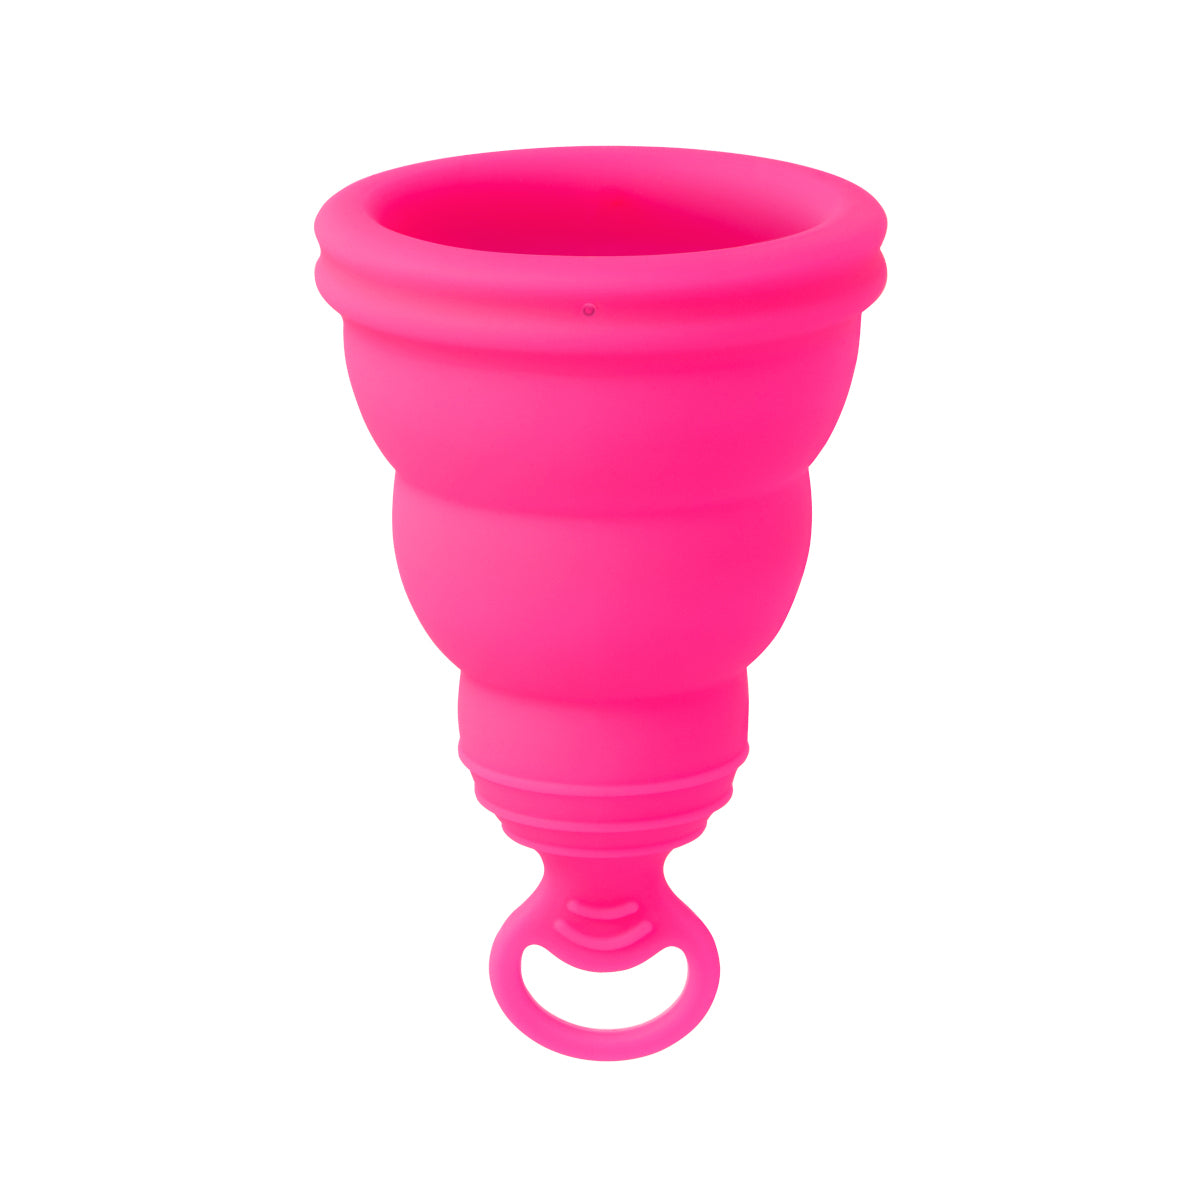 Intimina Lily Cup ONE - Starter's Menstrual Cup